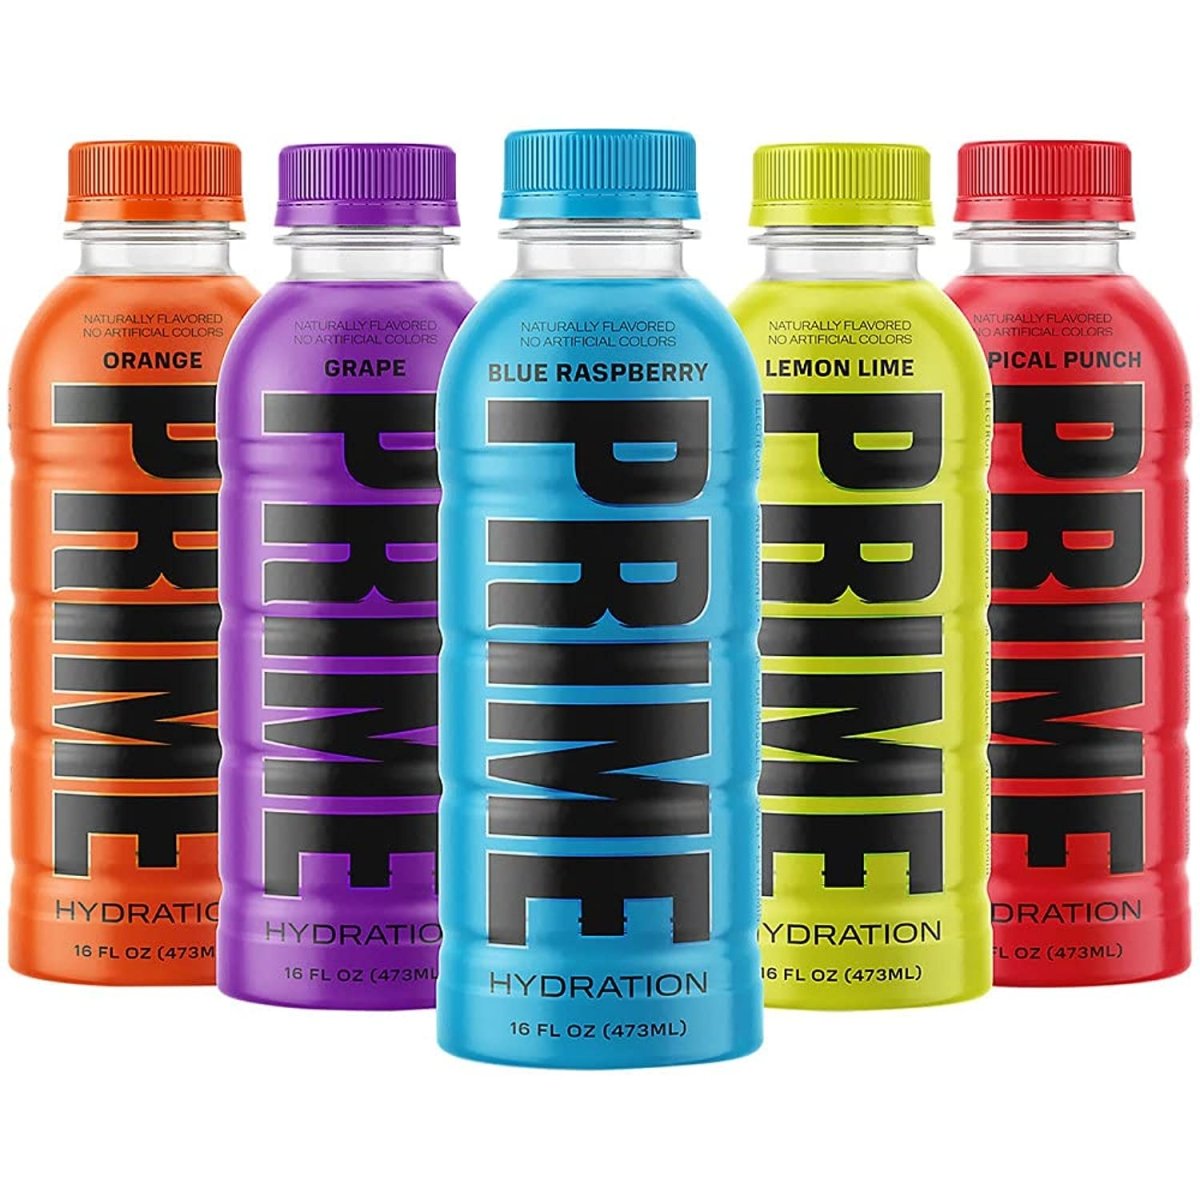 Where to Buy Prime Drinks in the UK? - Candy Mail UK